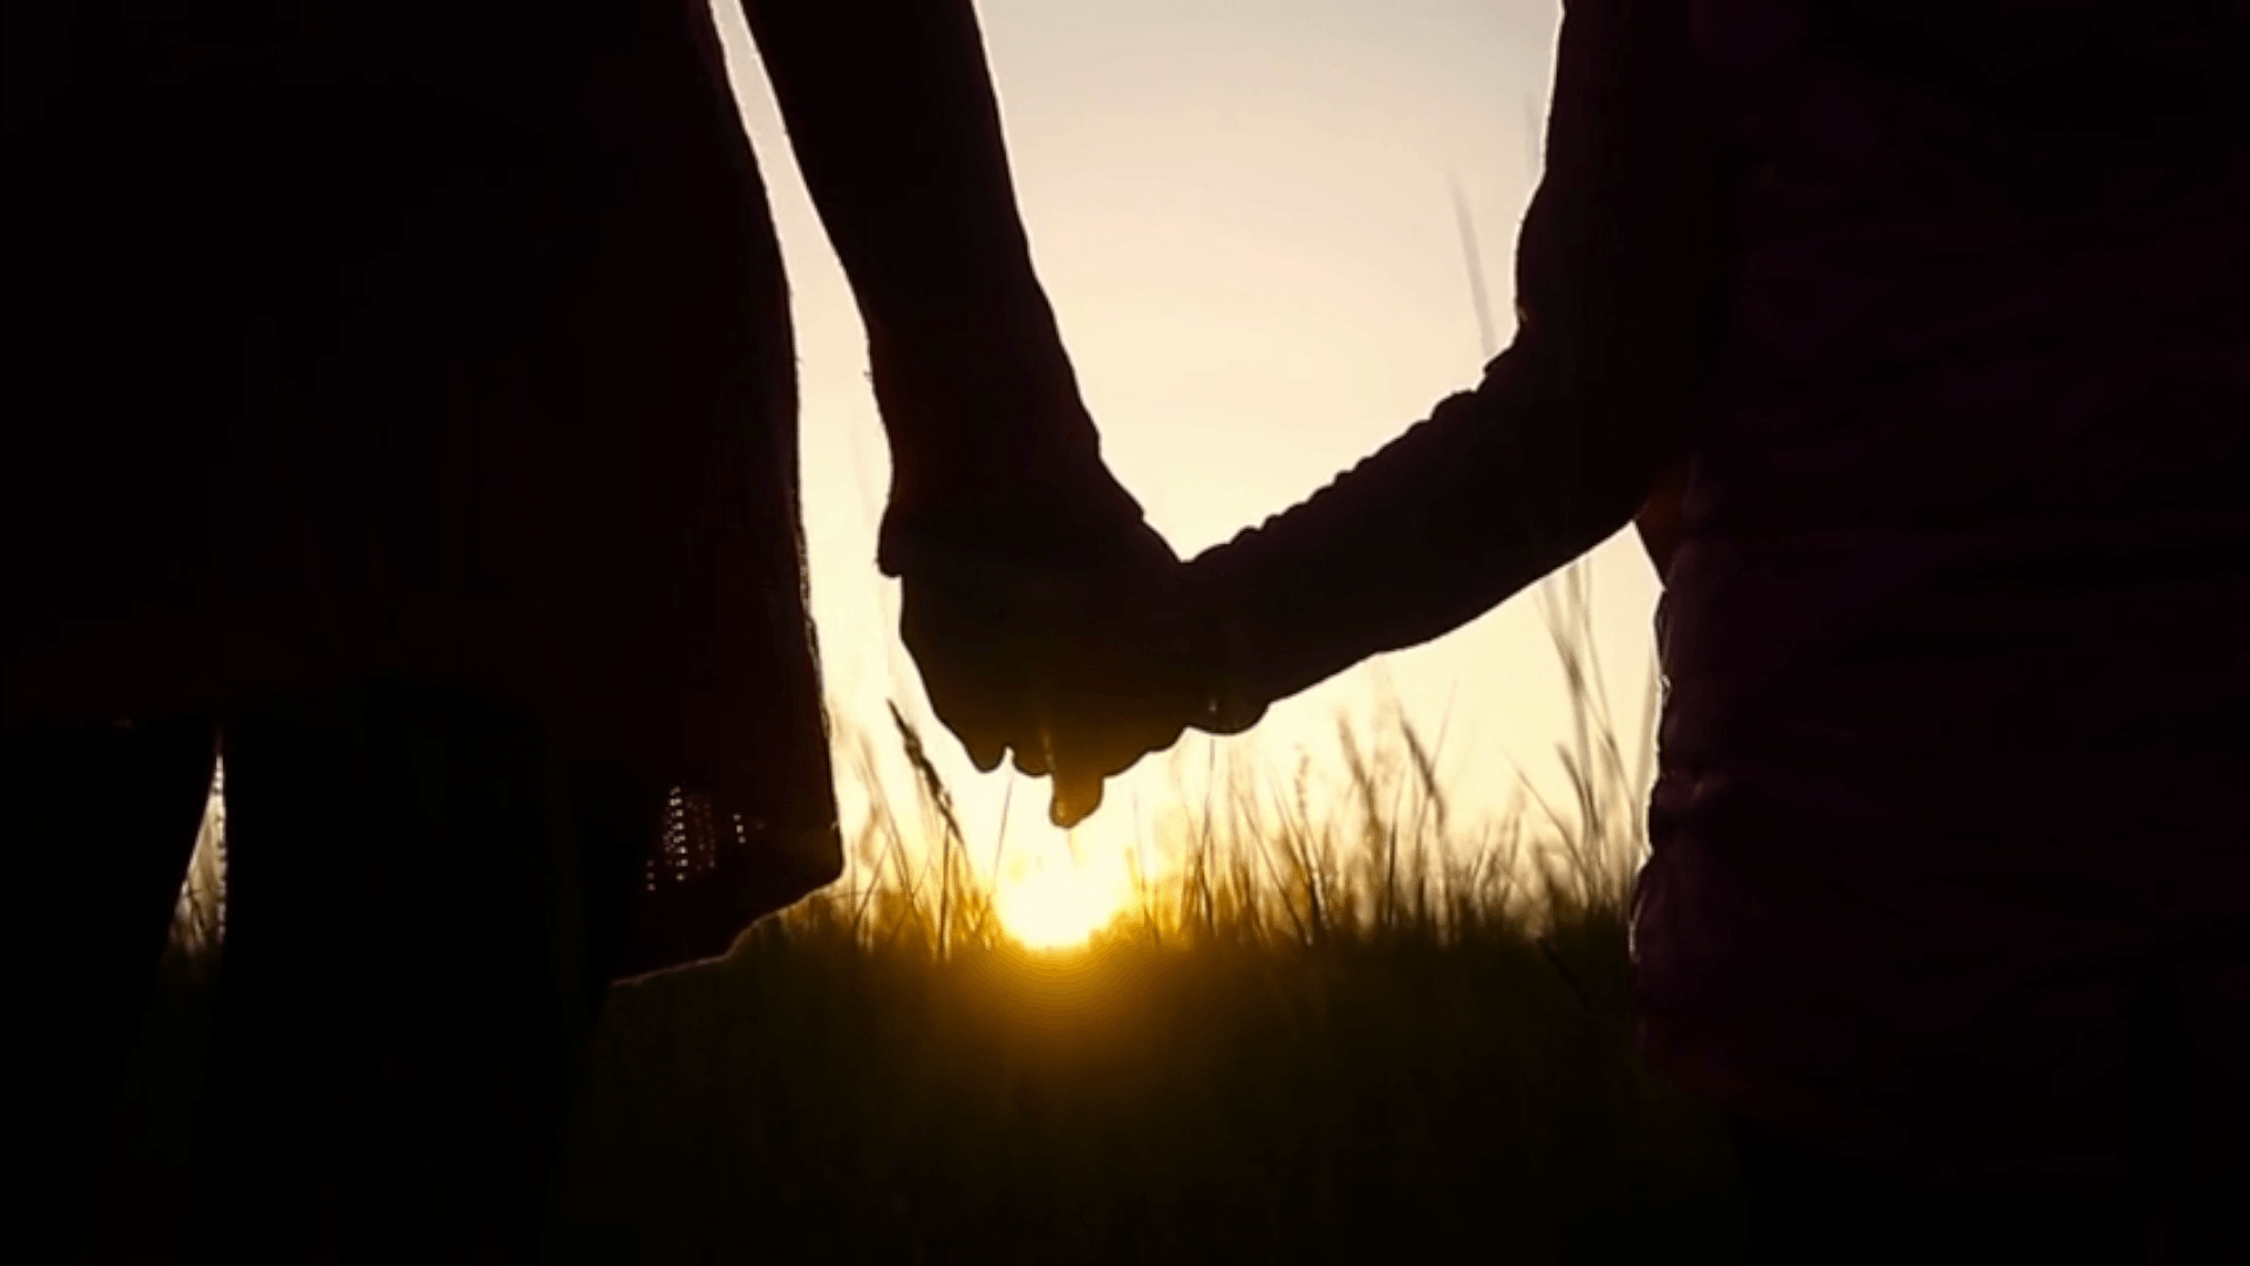 Two individuals are holding hands against a sunset backdrop with a field of tall grasses. The sun is low on the horizon, silhouetting the figures and creating a warm glow that outlines their joined hands. The image captures a moment of connection or partnership in a serene, natural setting.